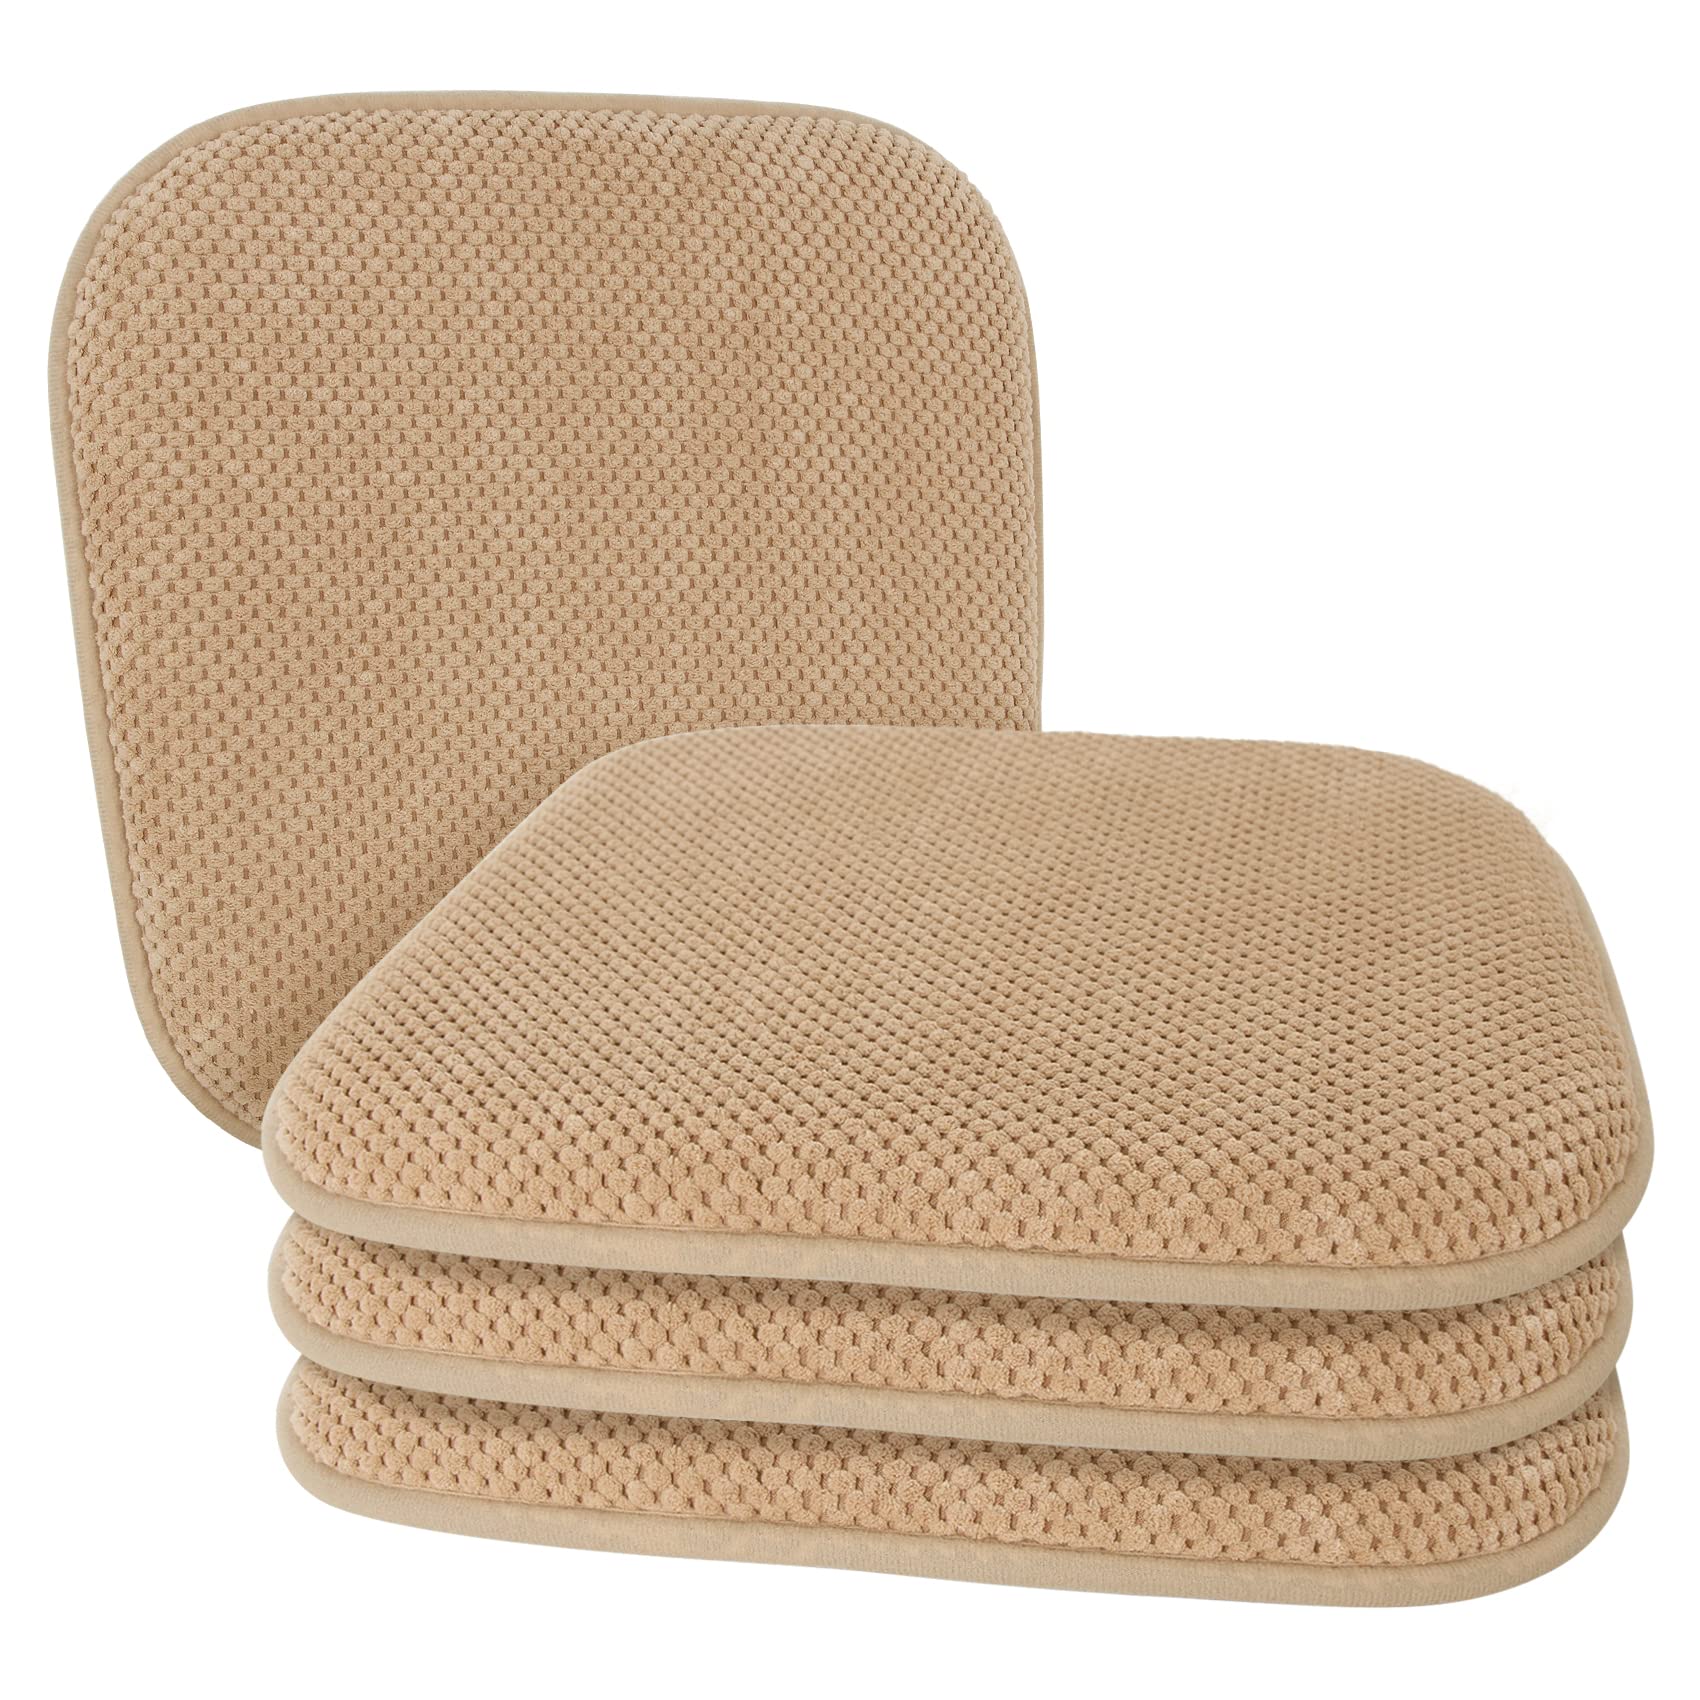 PAGGED Khaki Kitchen Dining Chairs Cushions Set of 4 Non Slip Foam Patio Seat Cushions Washable Soft Thick Pads Large Wooden Metal Tapered Chair Cushions,17" x 16"